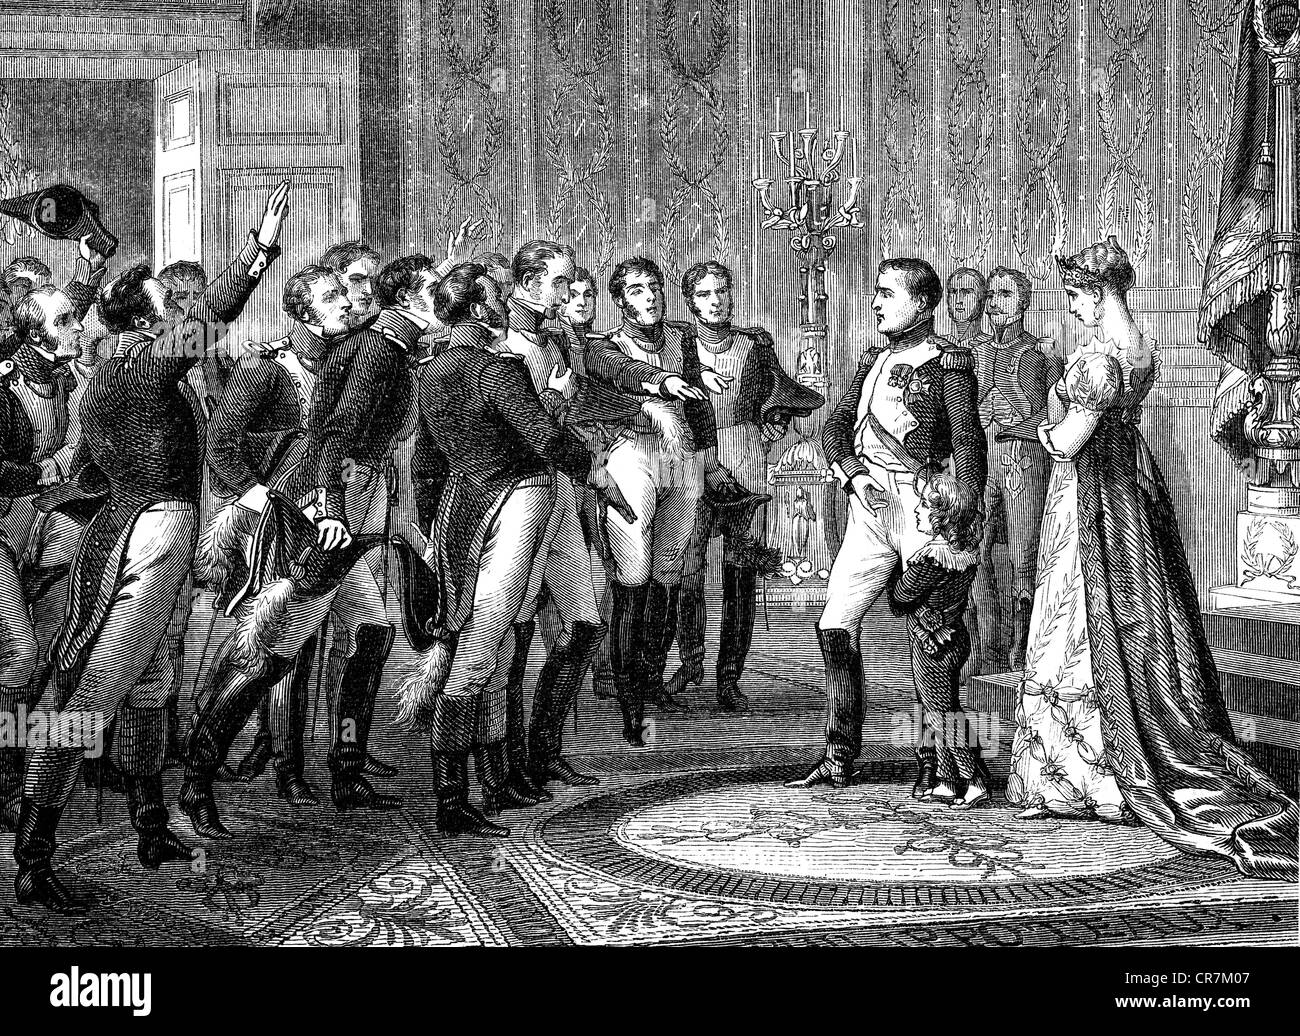 Napoleon I, 15.8.1769 - 5.5.1821, Emperor of the French 2.12.1804 - 22.6.1815, abdicating in favour of his son, 6.4.1814, wood engraving, 19th century, Stock Photo